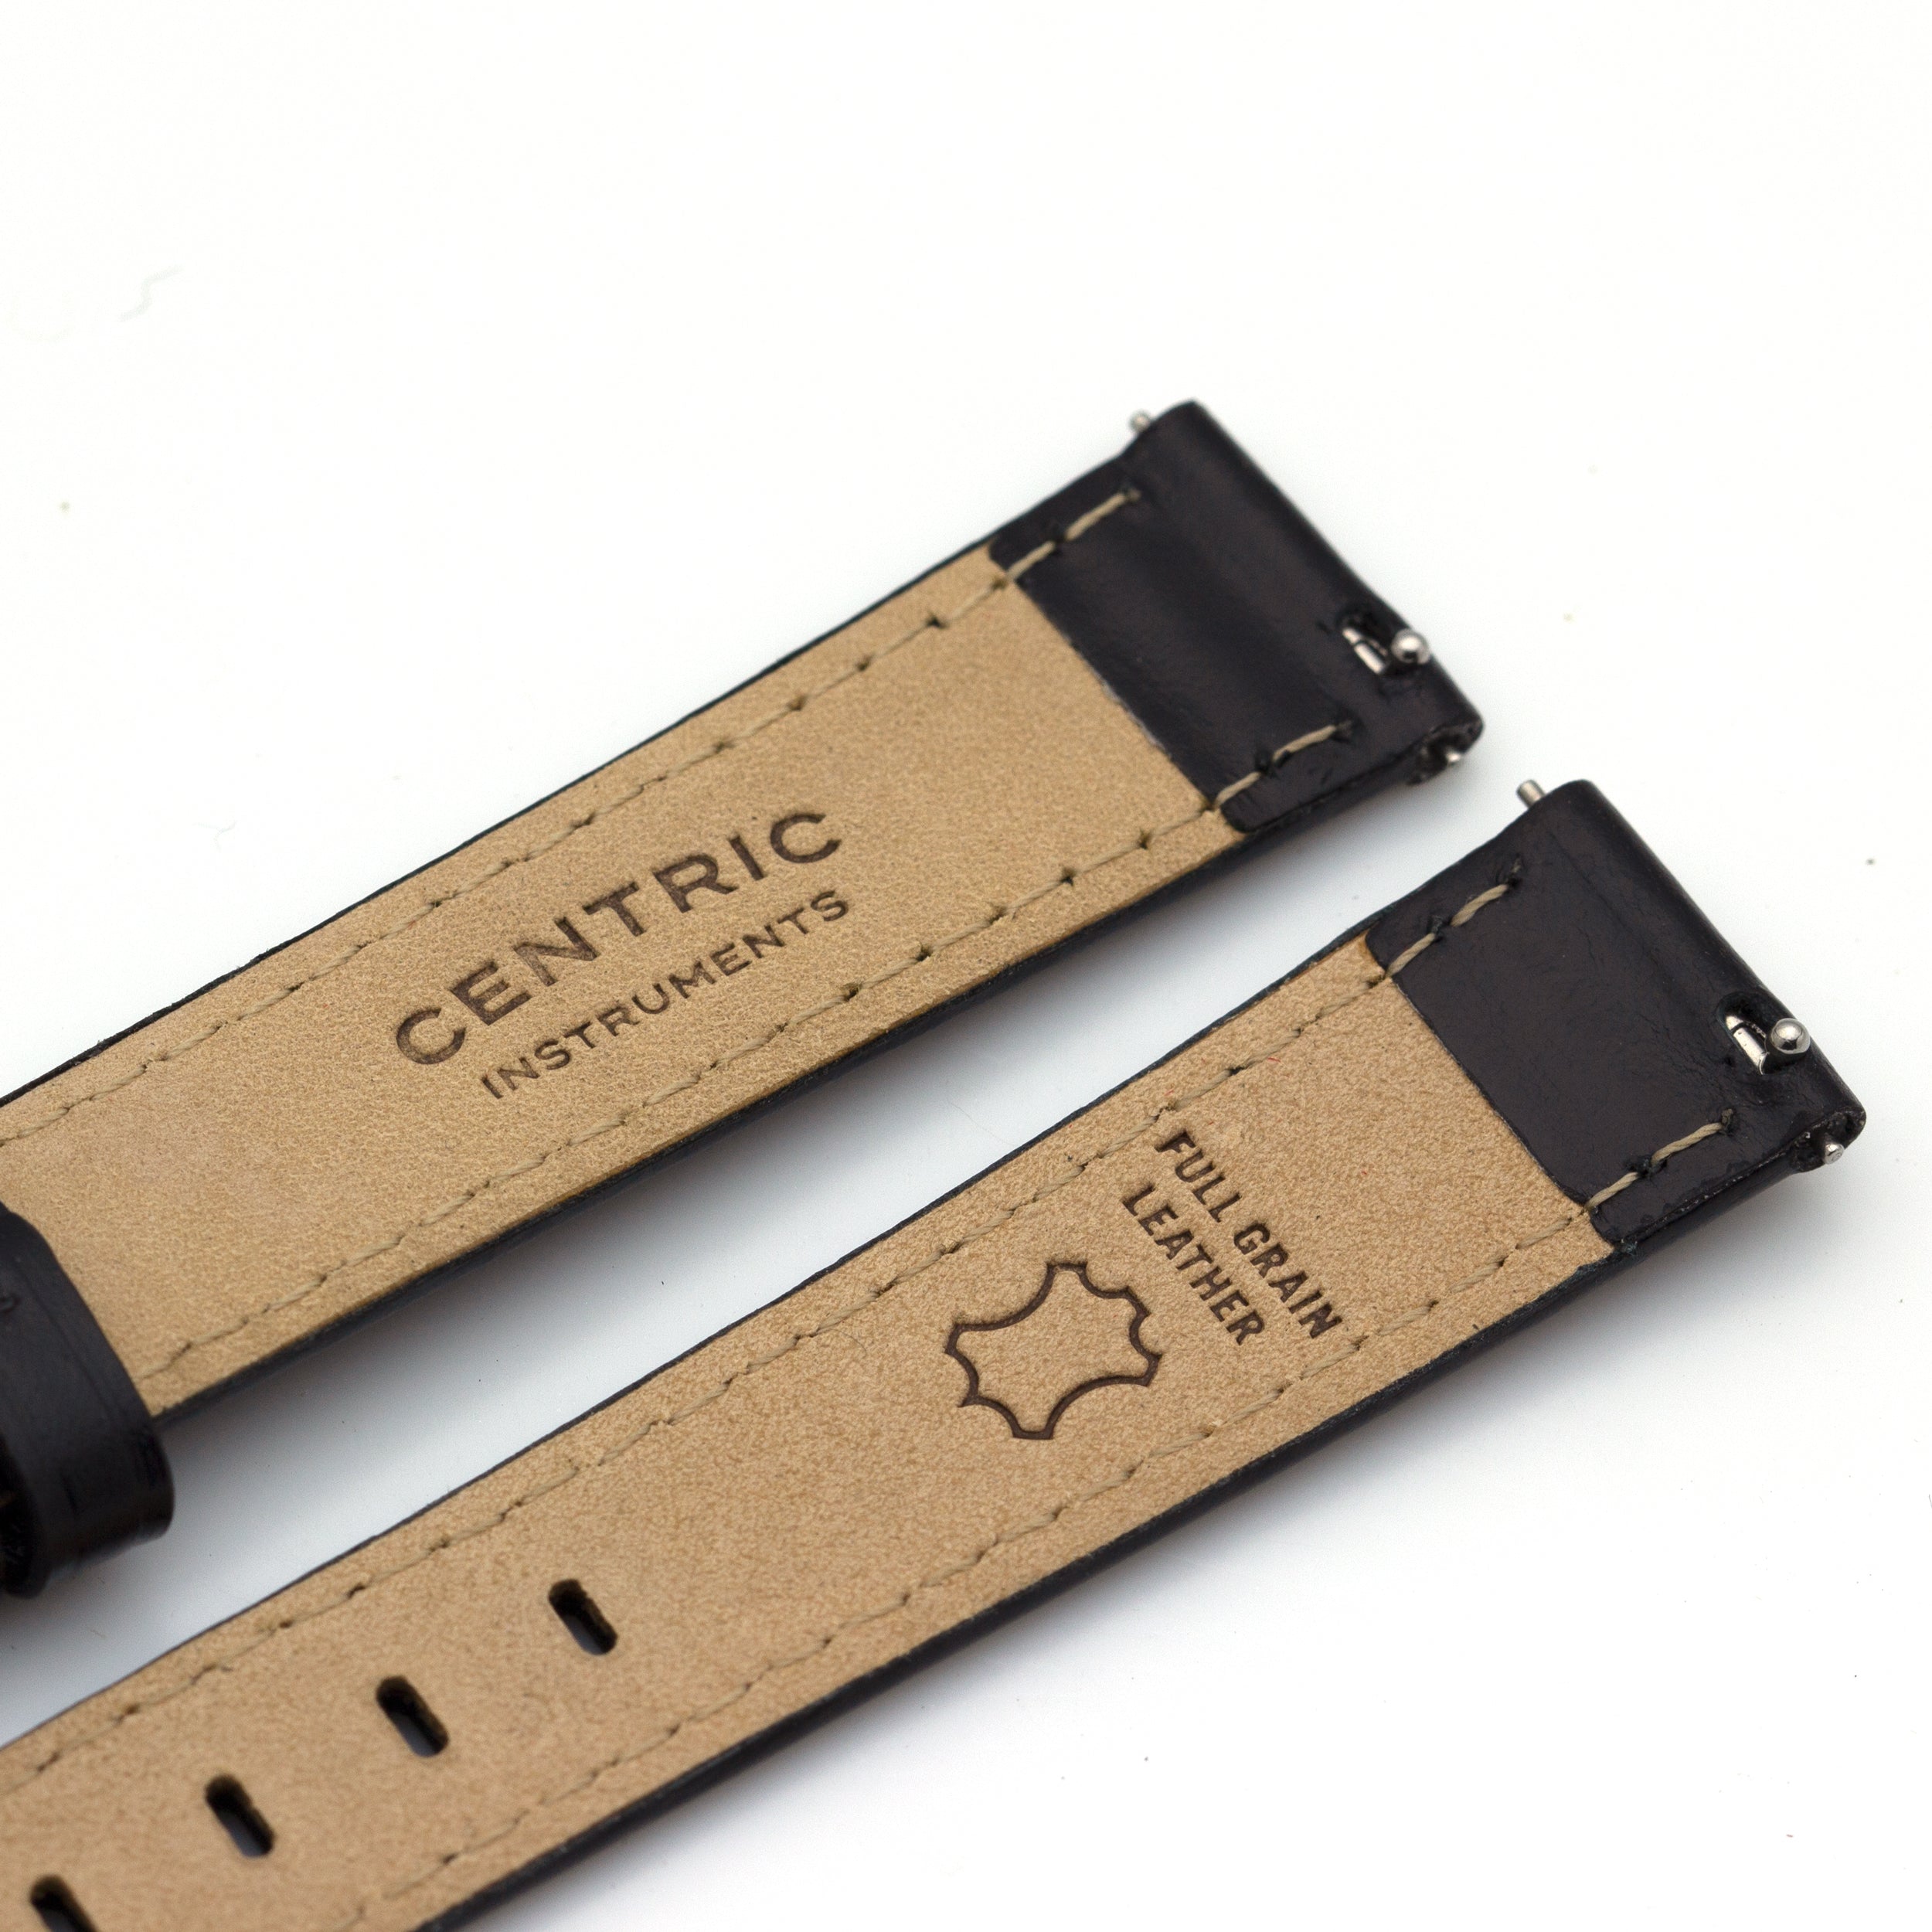 Field Watch MkIII Standard (Ivory) - Leather Band